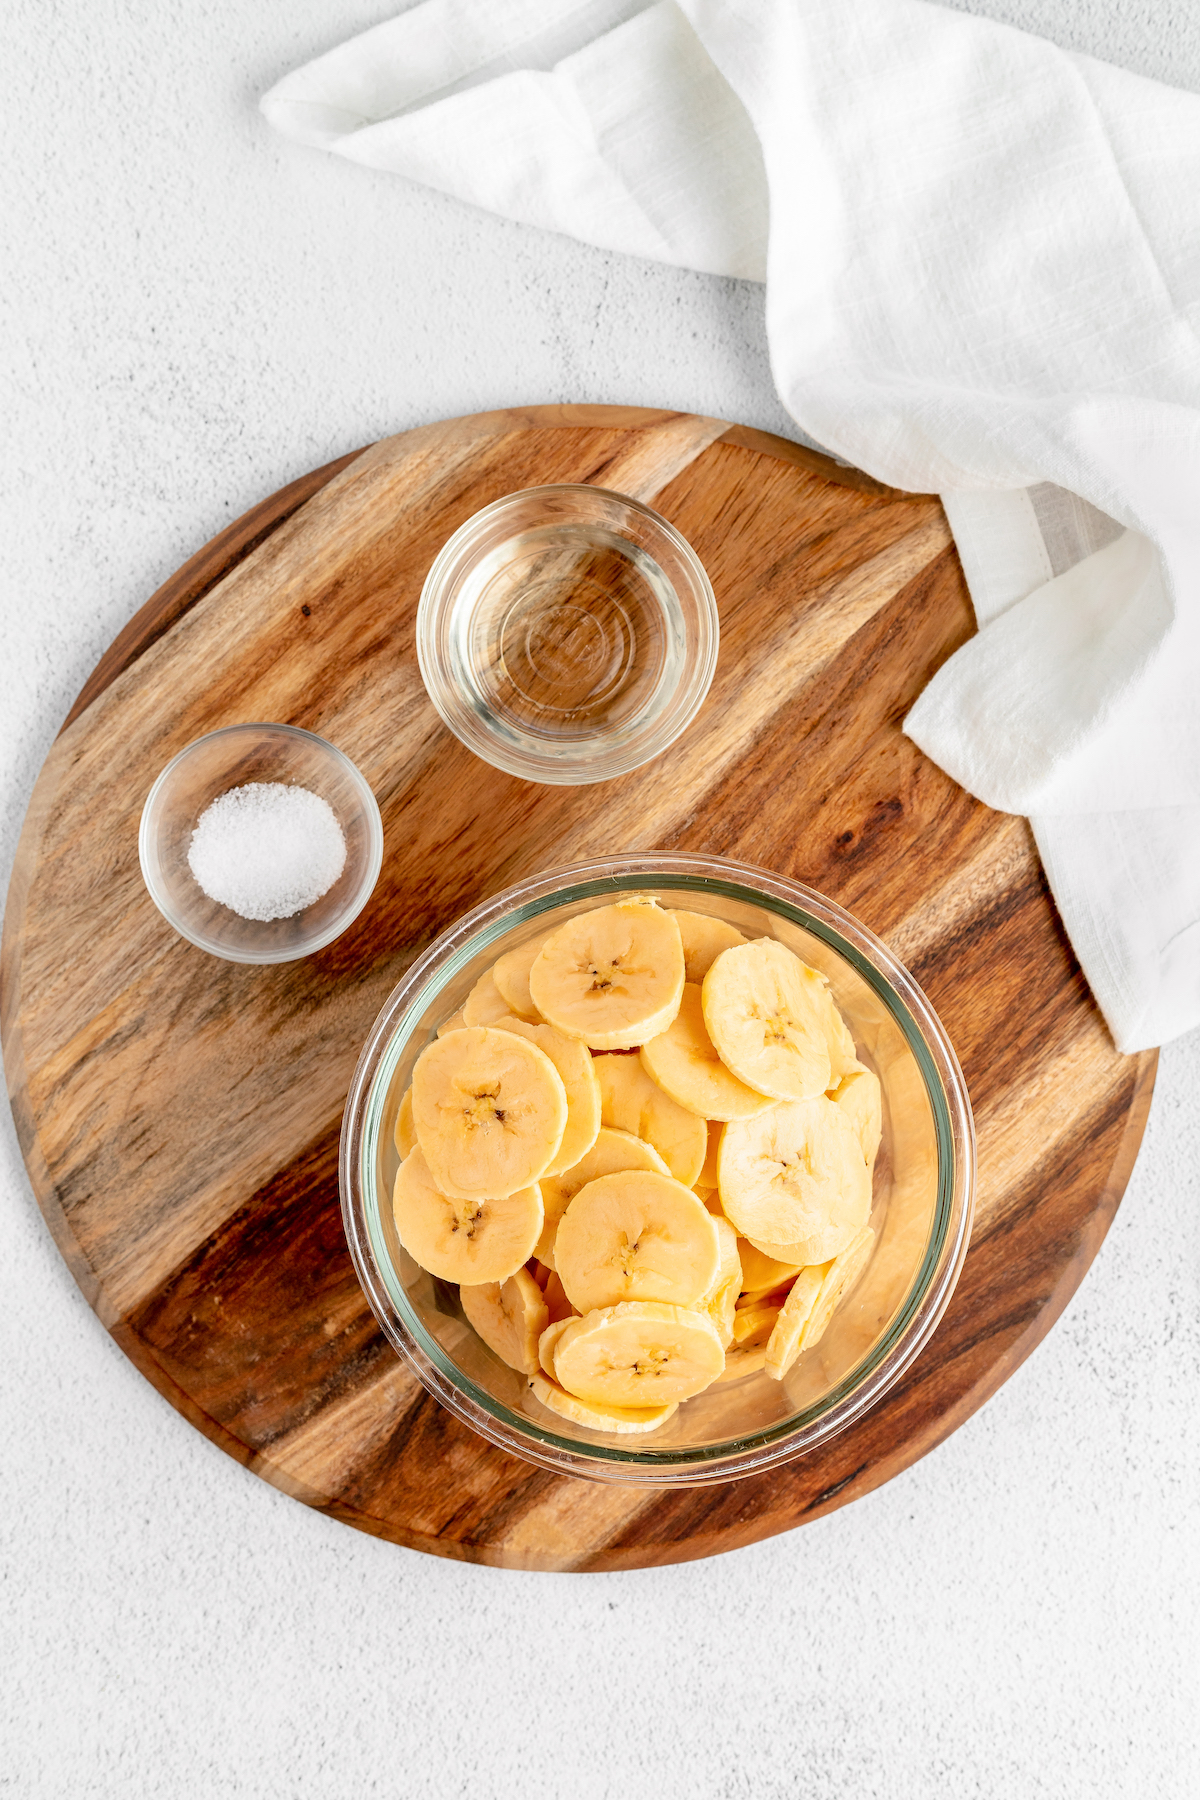 Overhead shot of a wooden cutting board. A glass bowl of sliced plantains, and two small glass dishes of salt and oil, are arranged on the cutting board.